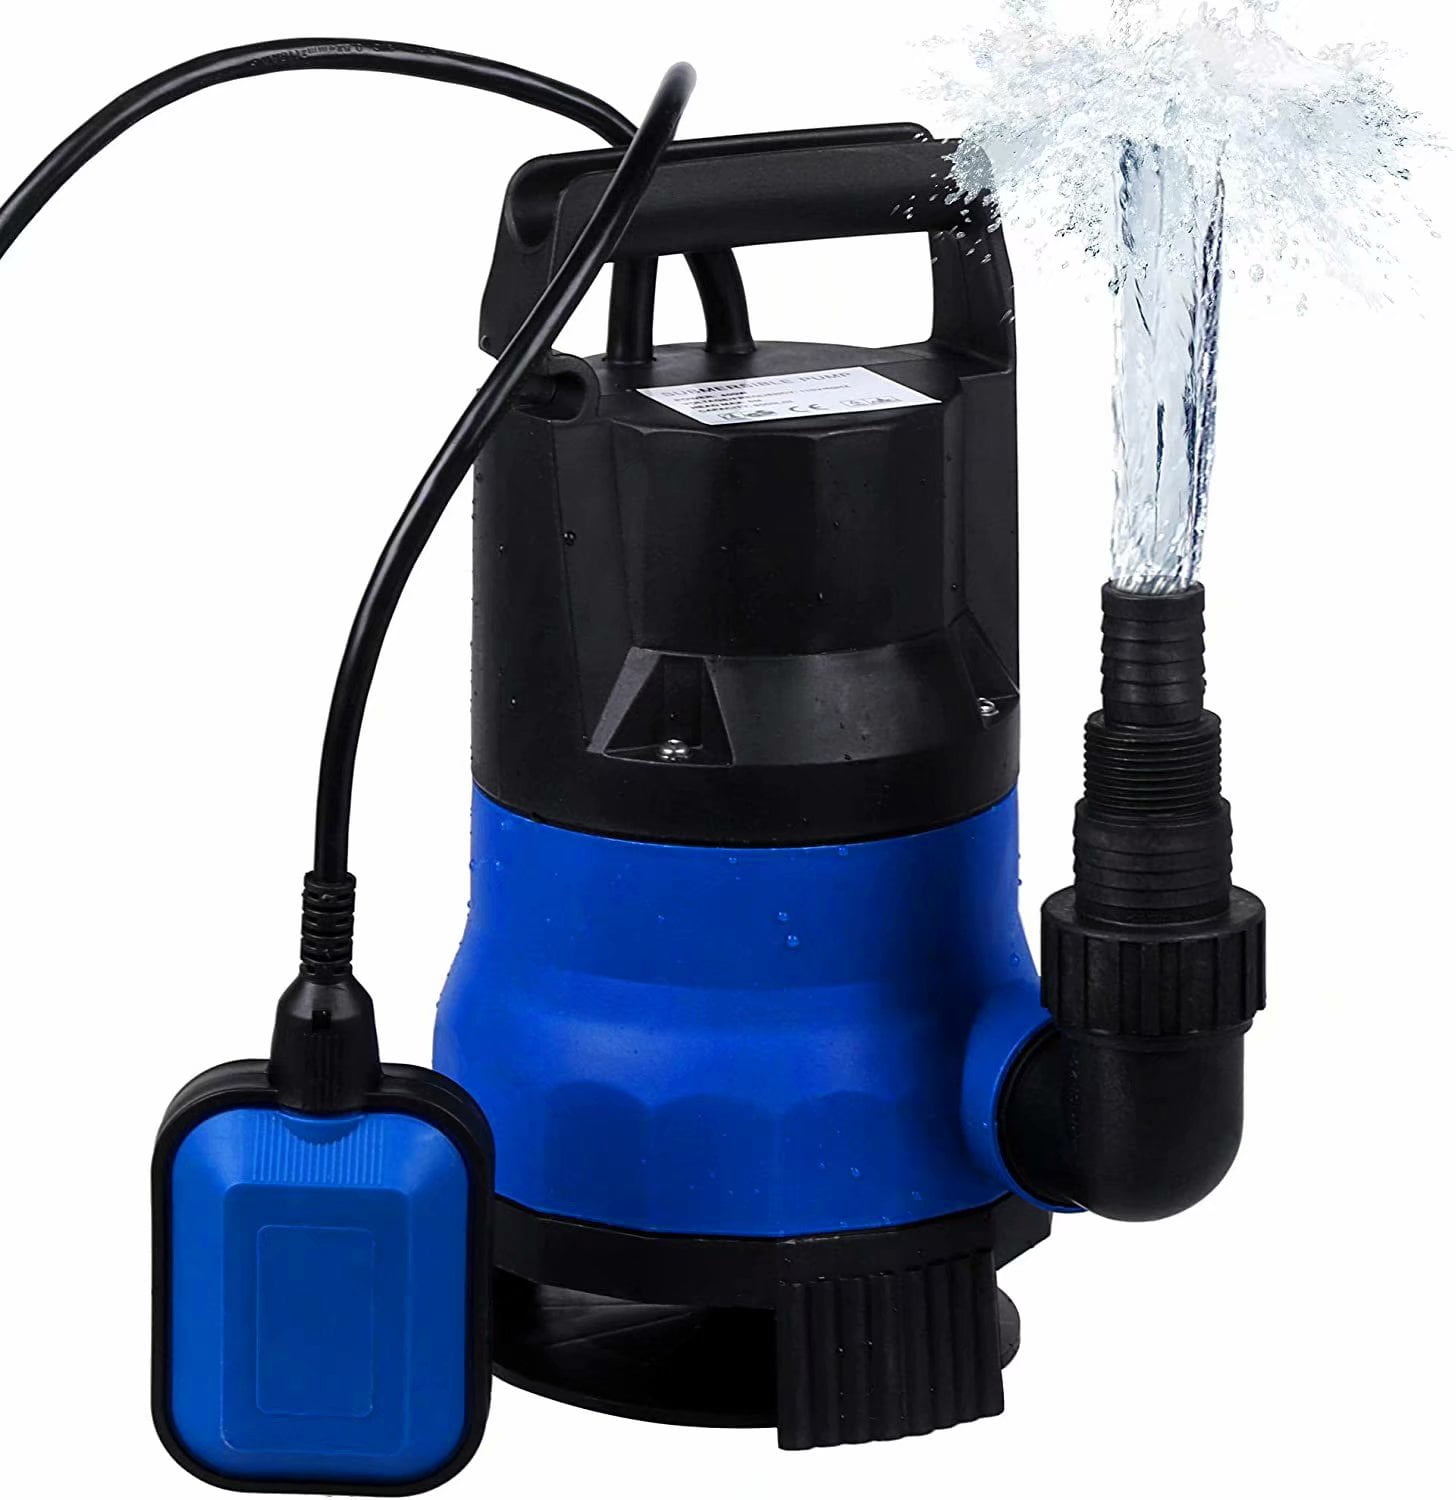 Yuanhua YH-750 Indoor Outdoor Submersible Water Pump Review